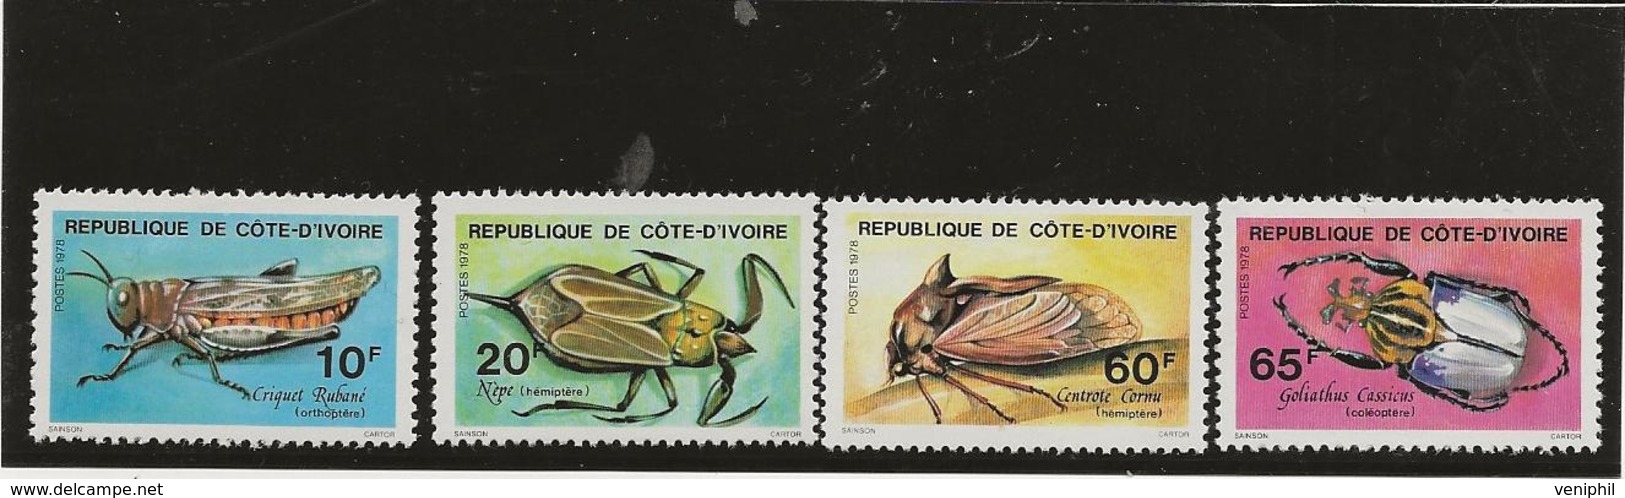 COTE D'IVOIRE - SERIE INSECTES N° 463 A 466  NEUF INFIME CHARNIERE -ANNEE 1978 - COTE :10 € - Ivory Coast (1960-...)